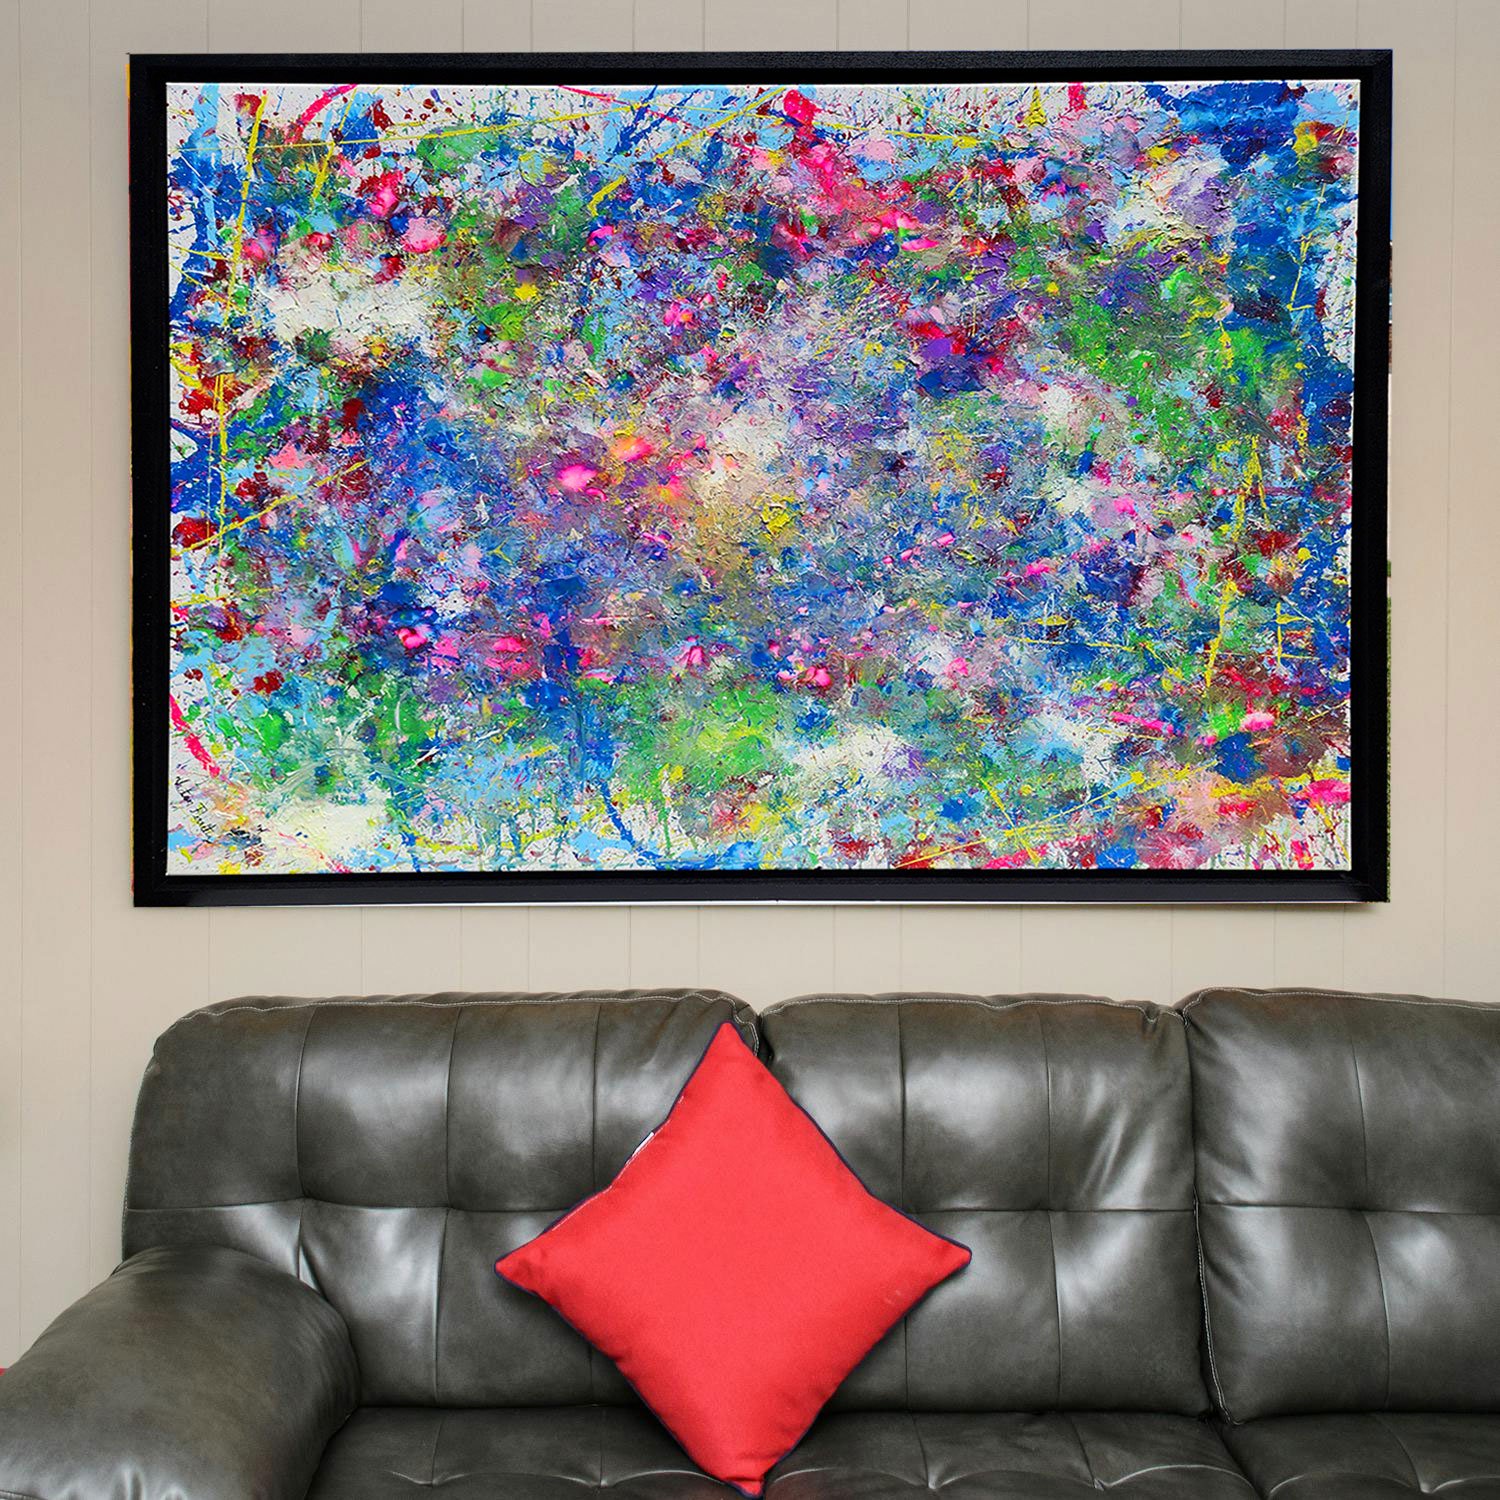 Abstract painting. Acrylic paint on canvas. This work of art has a custom frame handmade with completely strong wood and is already painted with a uniform black color. The frame already has some D-shaped hooks assembled, ready to hang in your beautiful home.